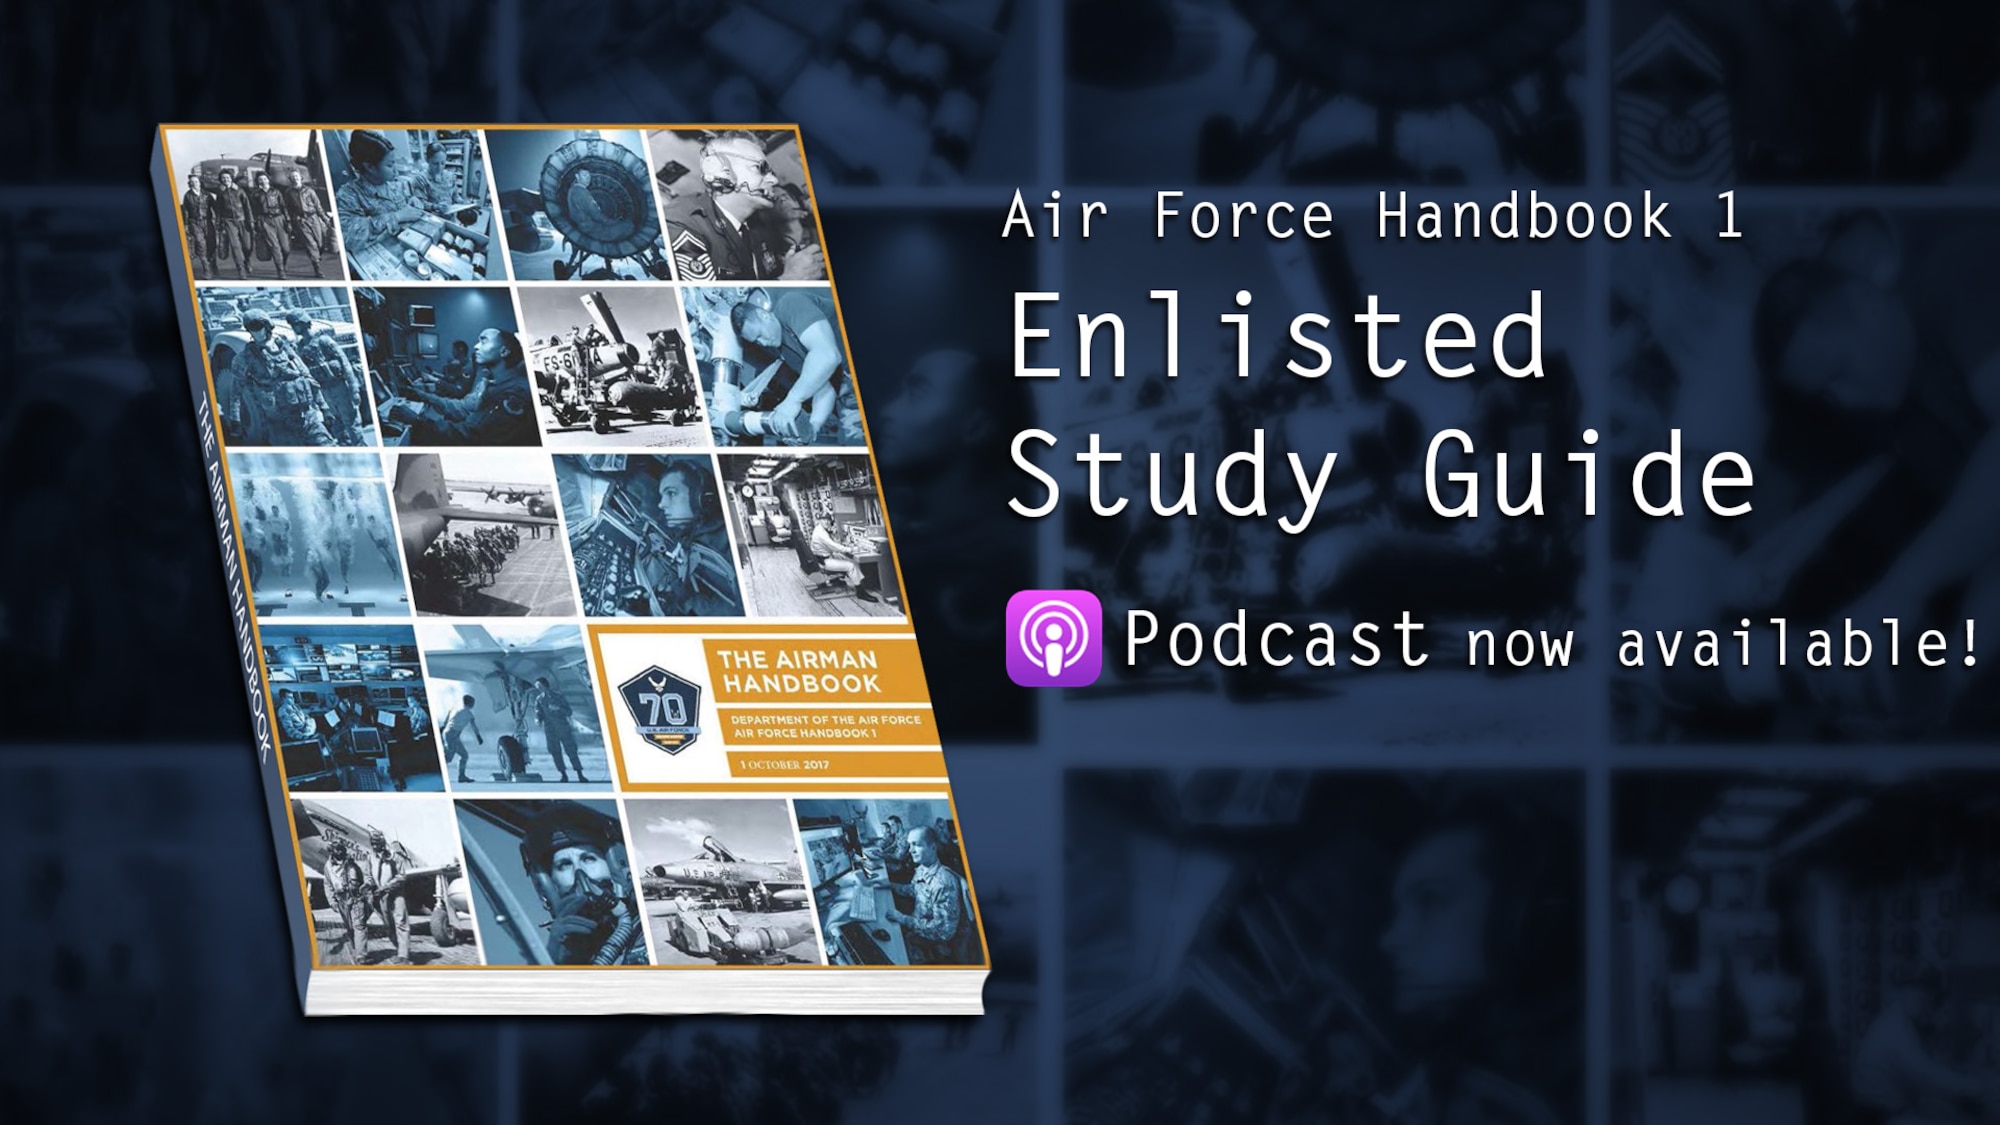 AFH 1 Enlisted Study Guide podcast channel on the Defense Visual Information Distribution Service. (U.S. Air Force graphic/2nd Lt. Robert Guest)